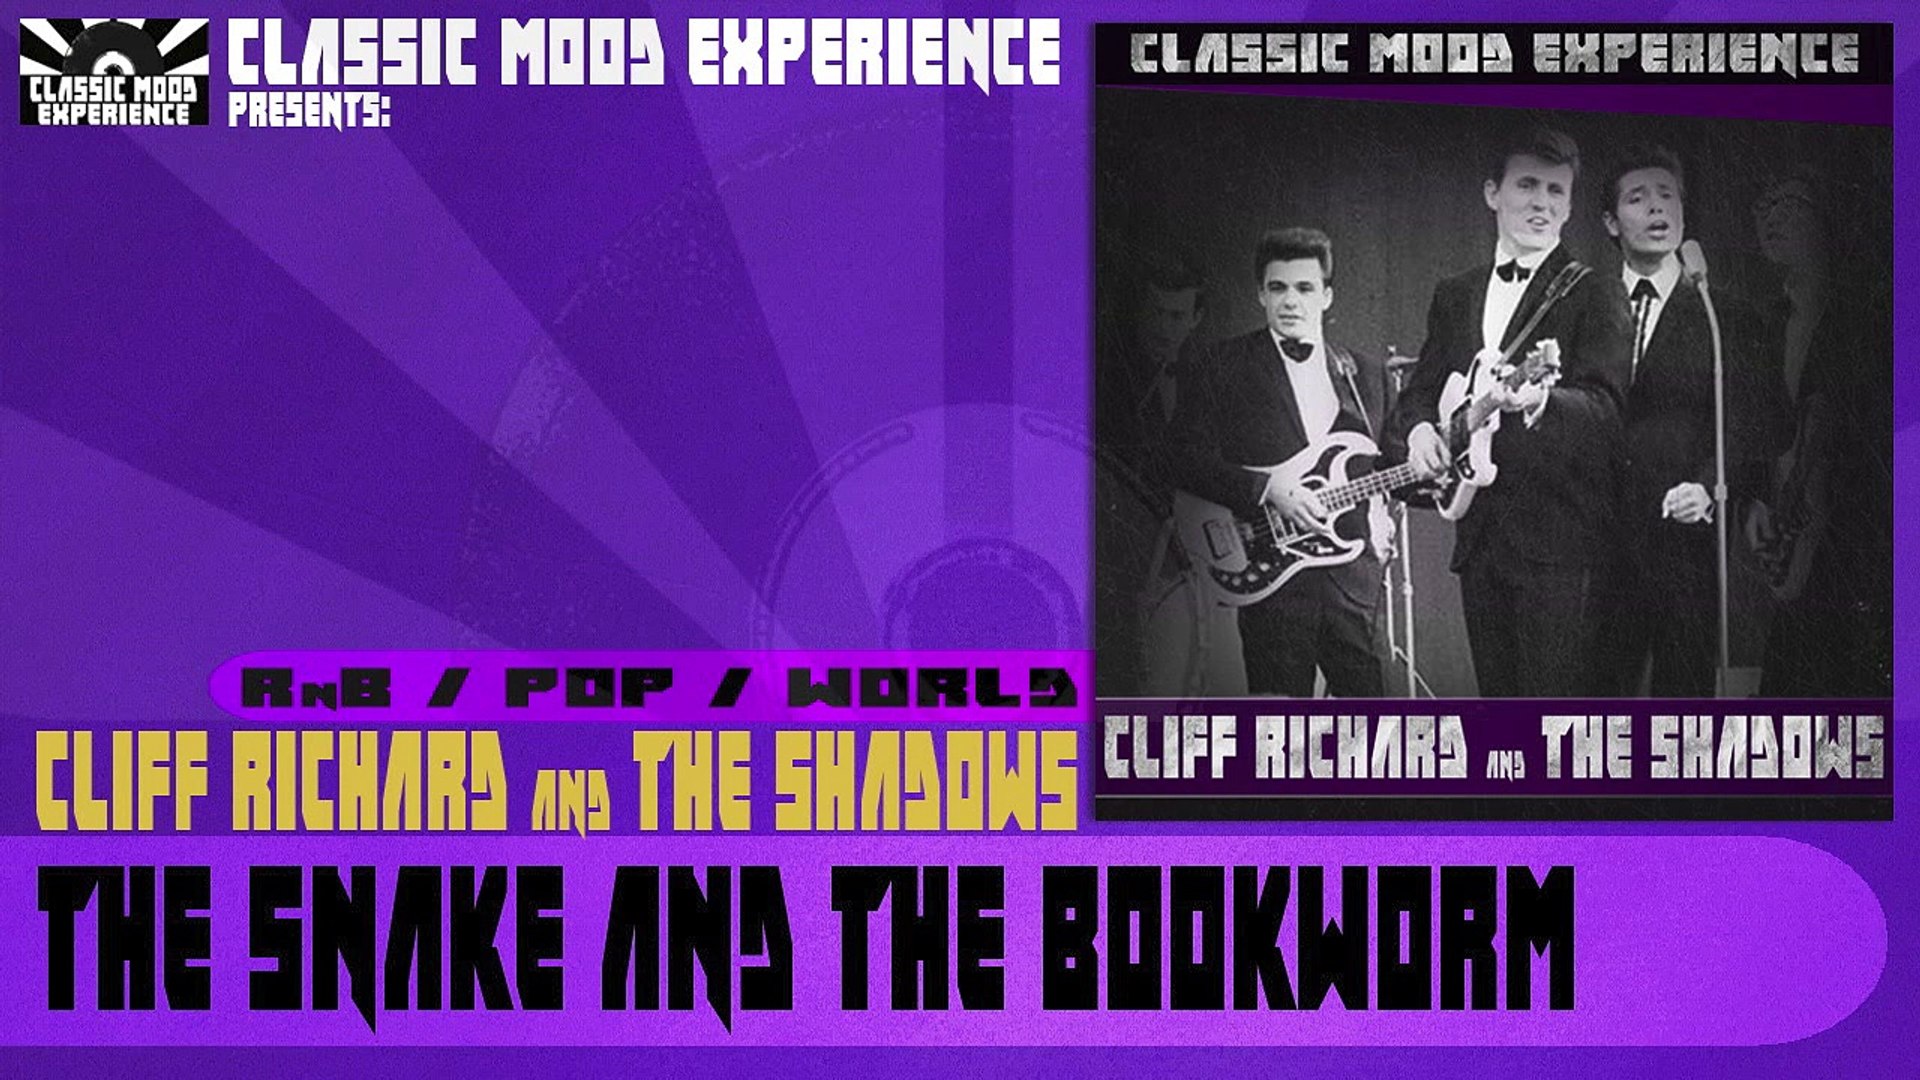 Cliff Richard & The Shadows - The Snake and the Bookworm (1959)